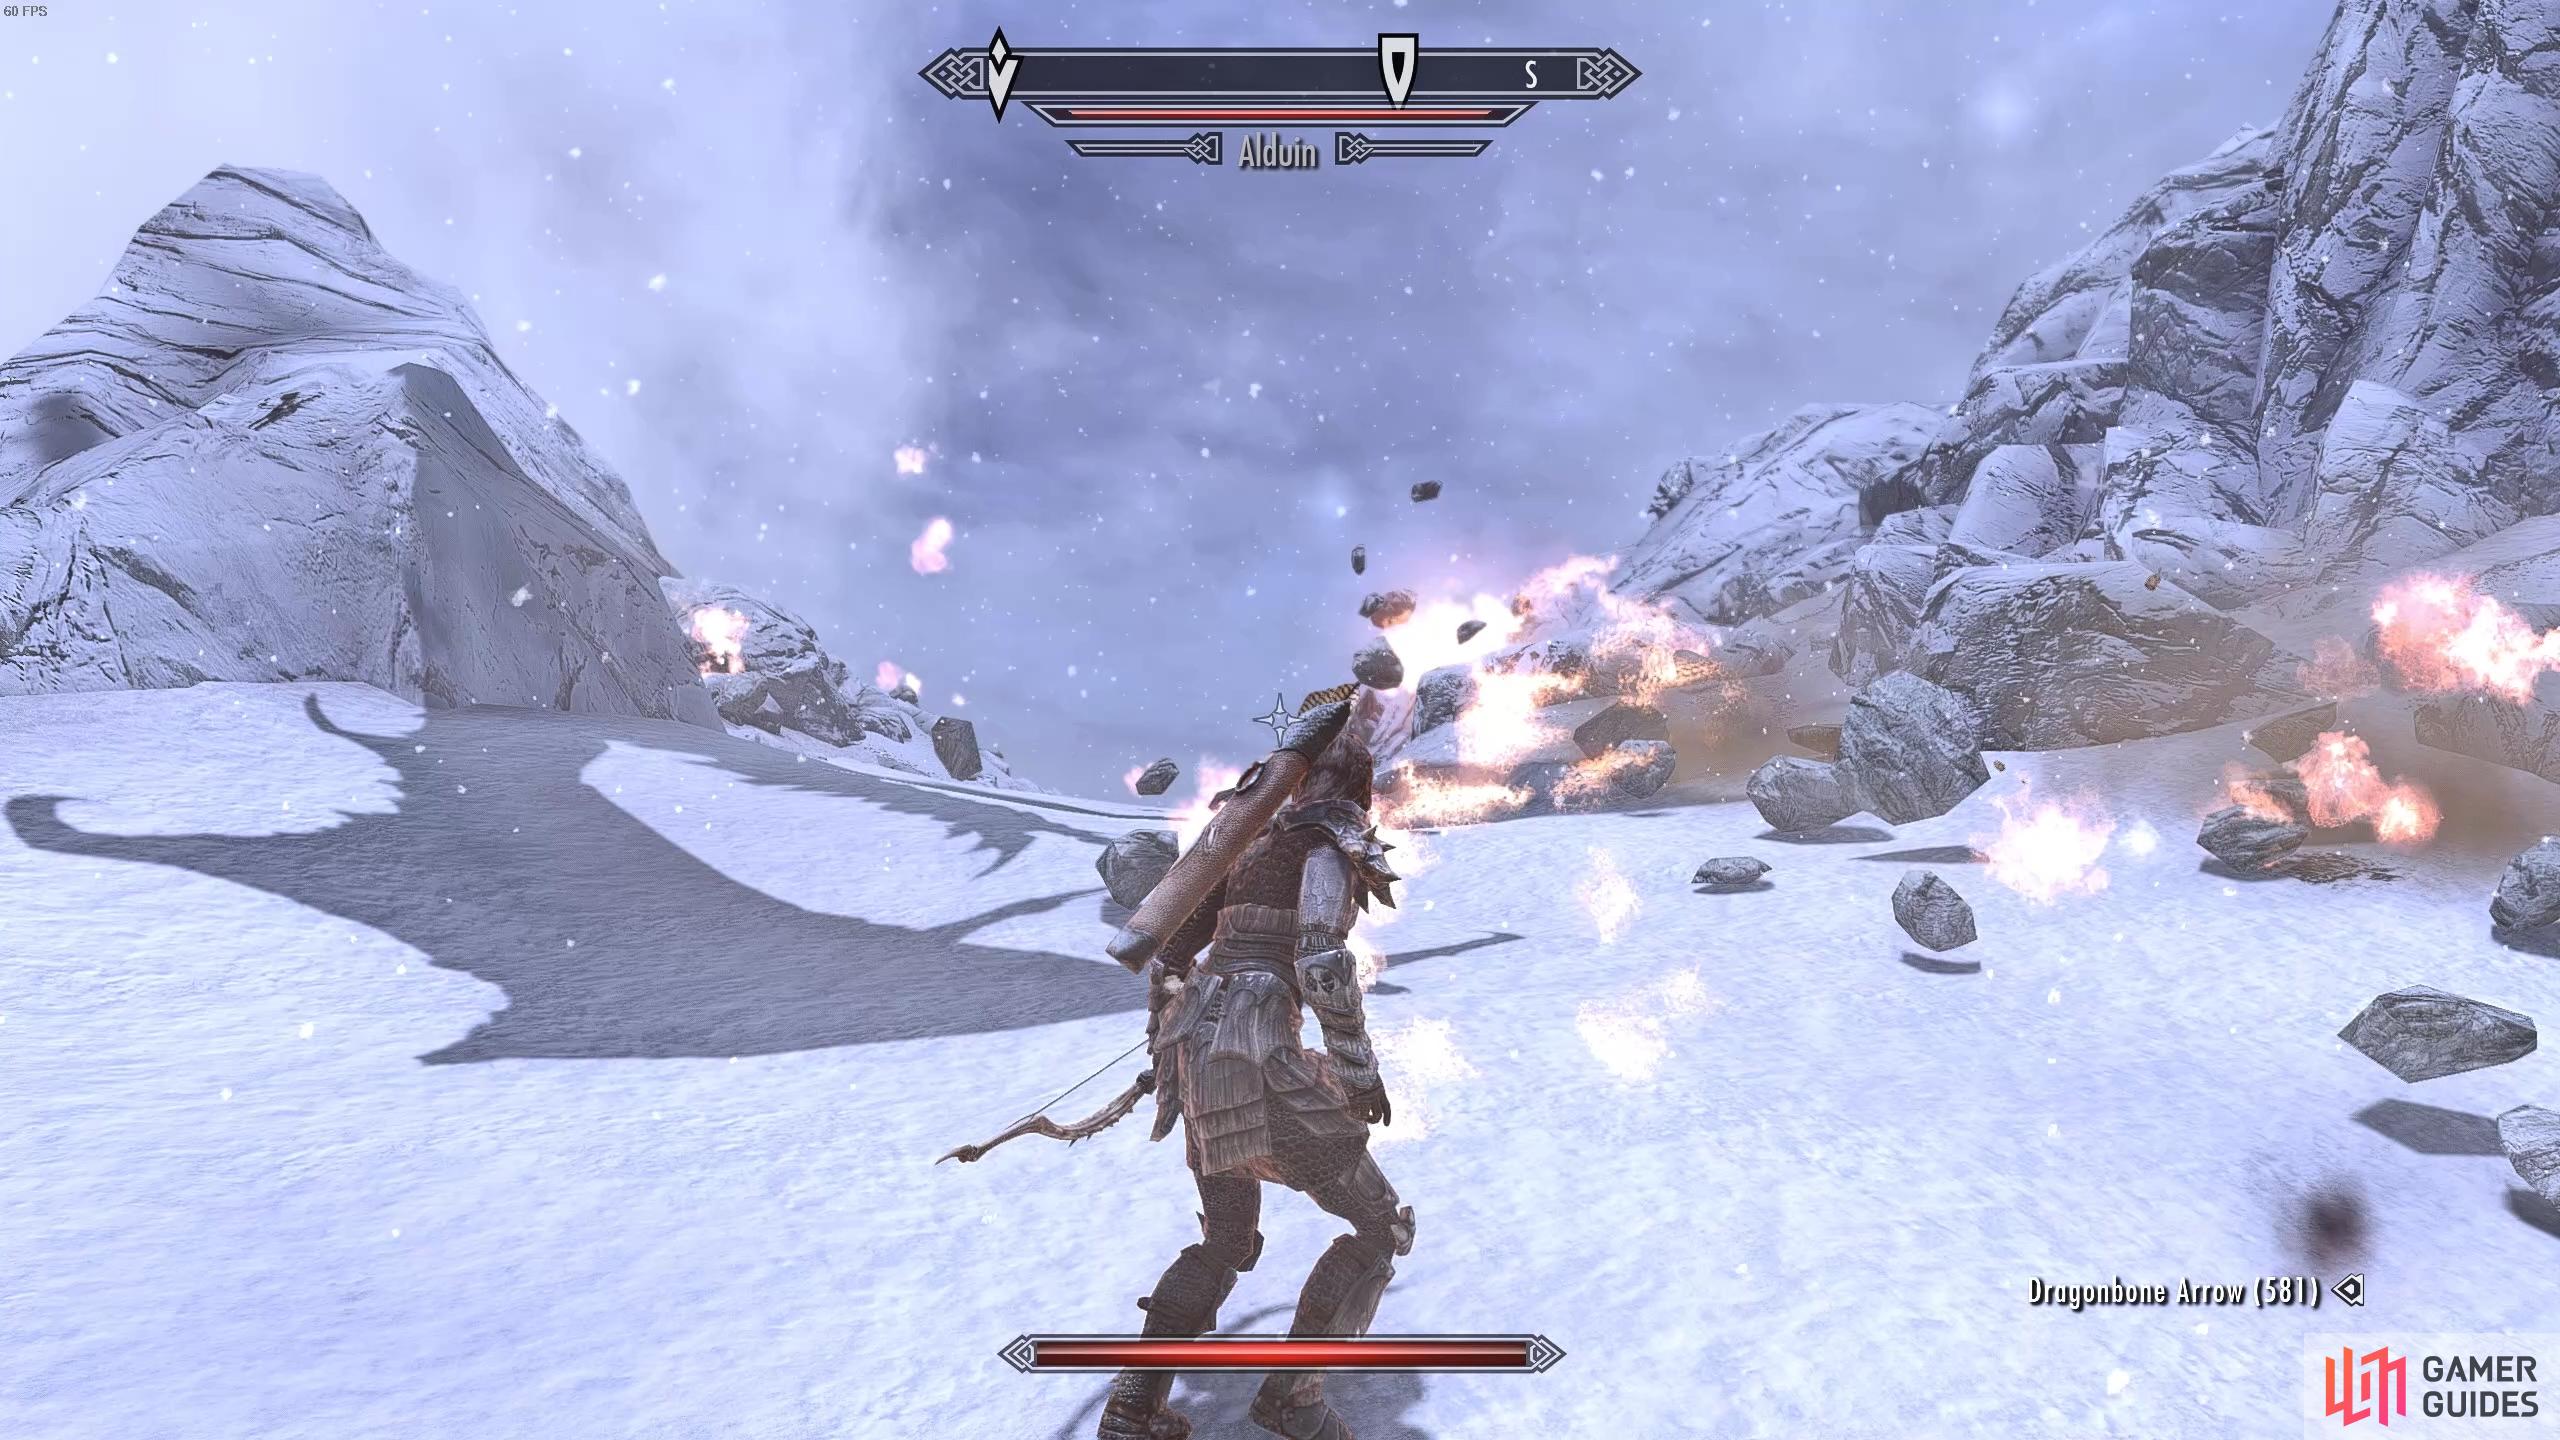 Try to avoid the fire rocks which fall from the sky during the fight.